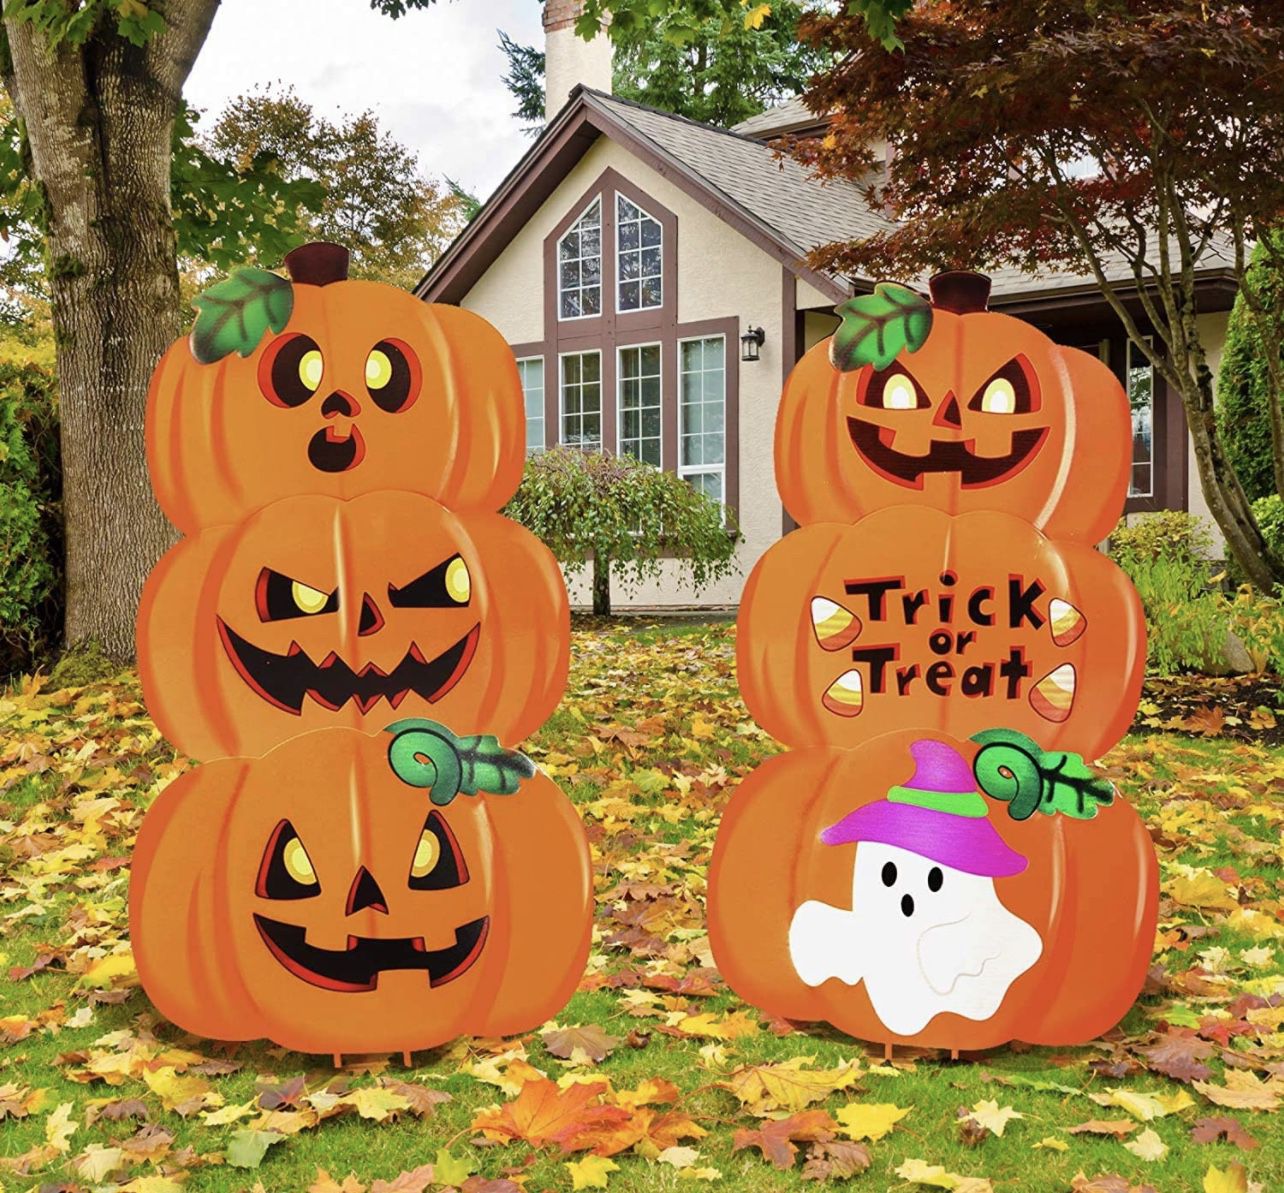 2 Stacked Metal Halloween Lawn Yard Stake Signs for Outdoor Decorations, Pumpkin & Ghost Home Decor,